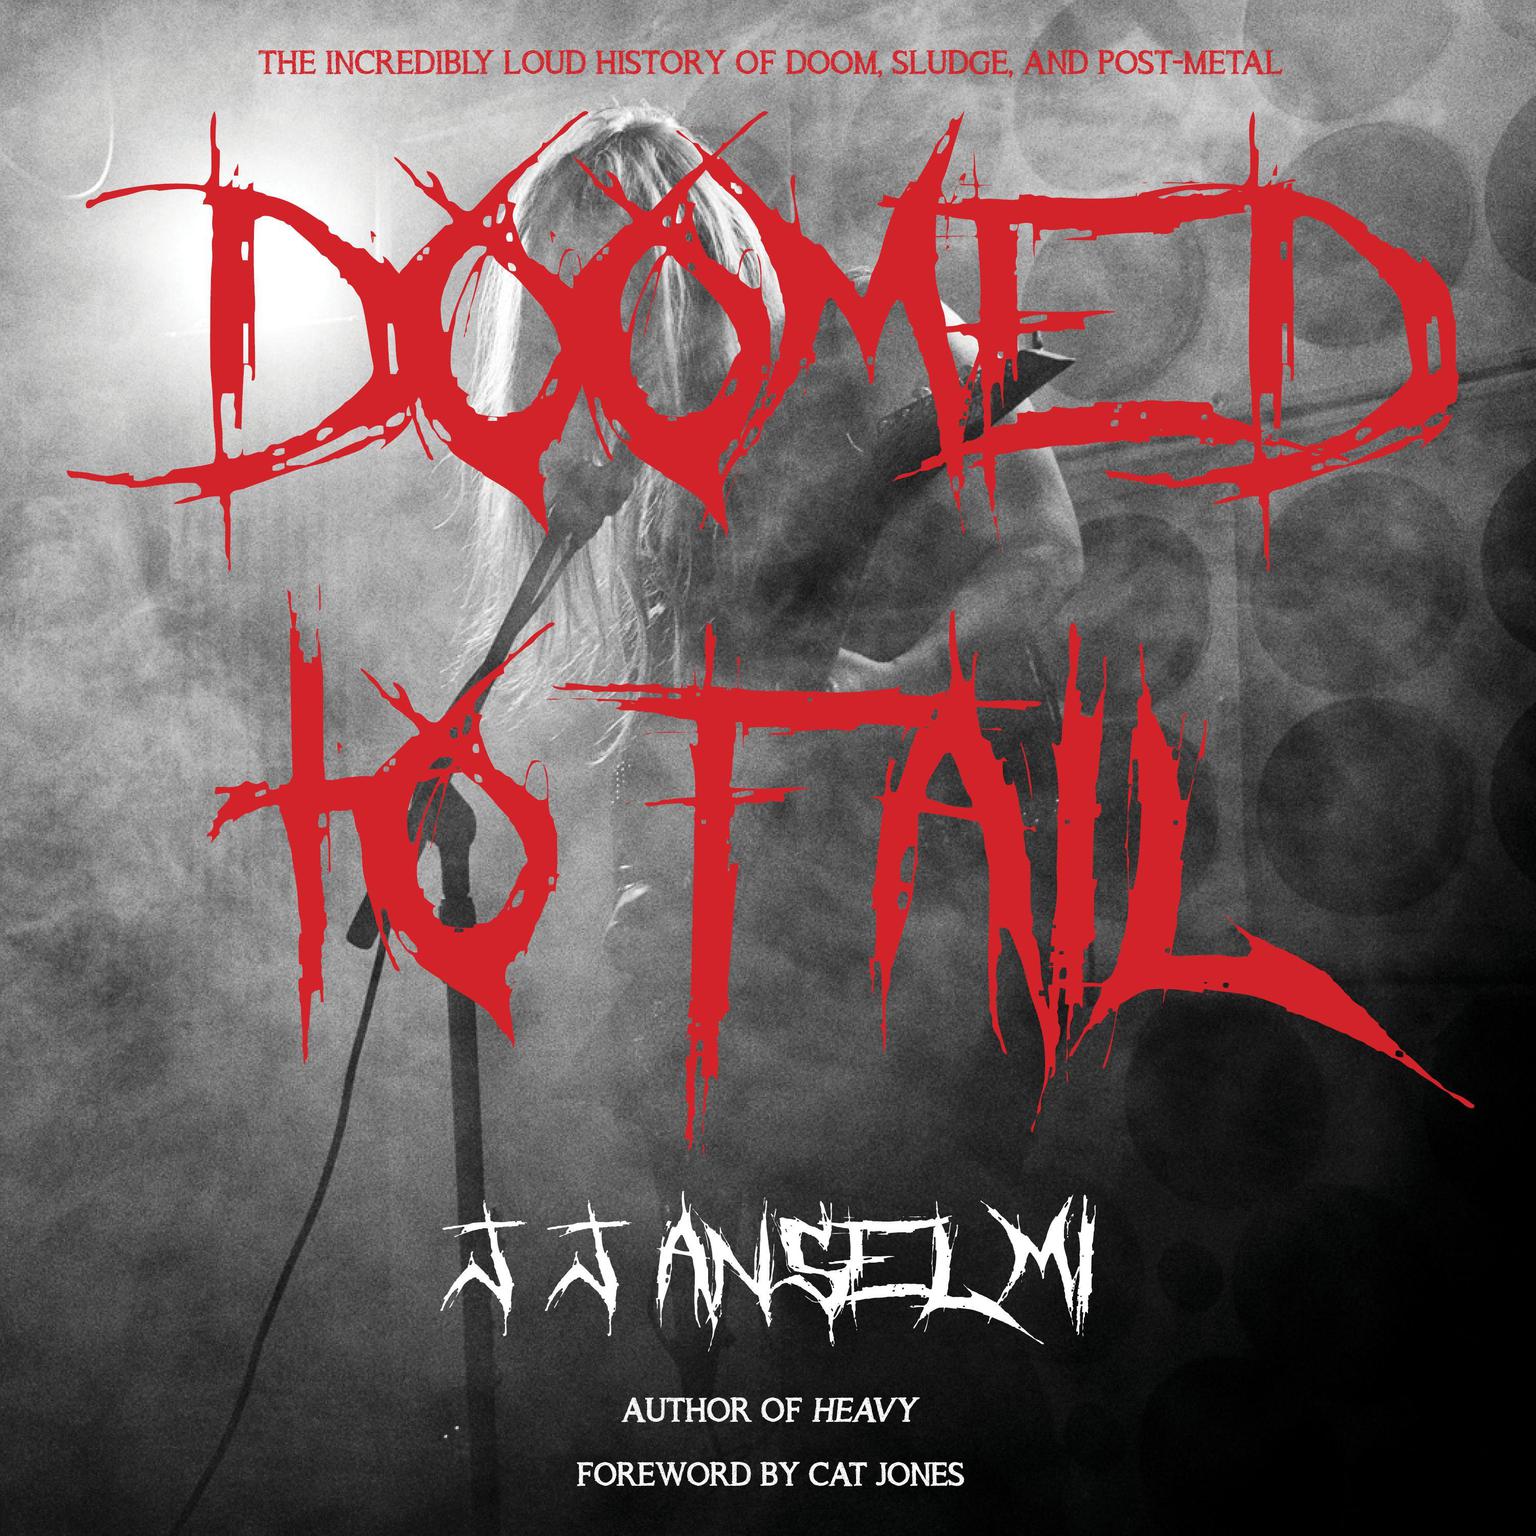 Doomed to Fail: The Incredibly Loud History of Doom, Sludge, and Post-metal Audiobook, by J.J. Anselmi